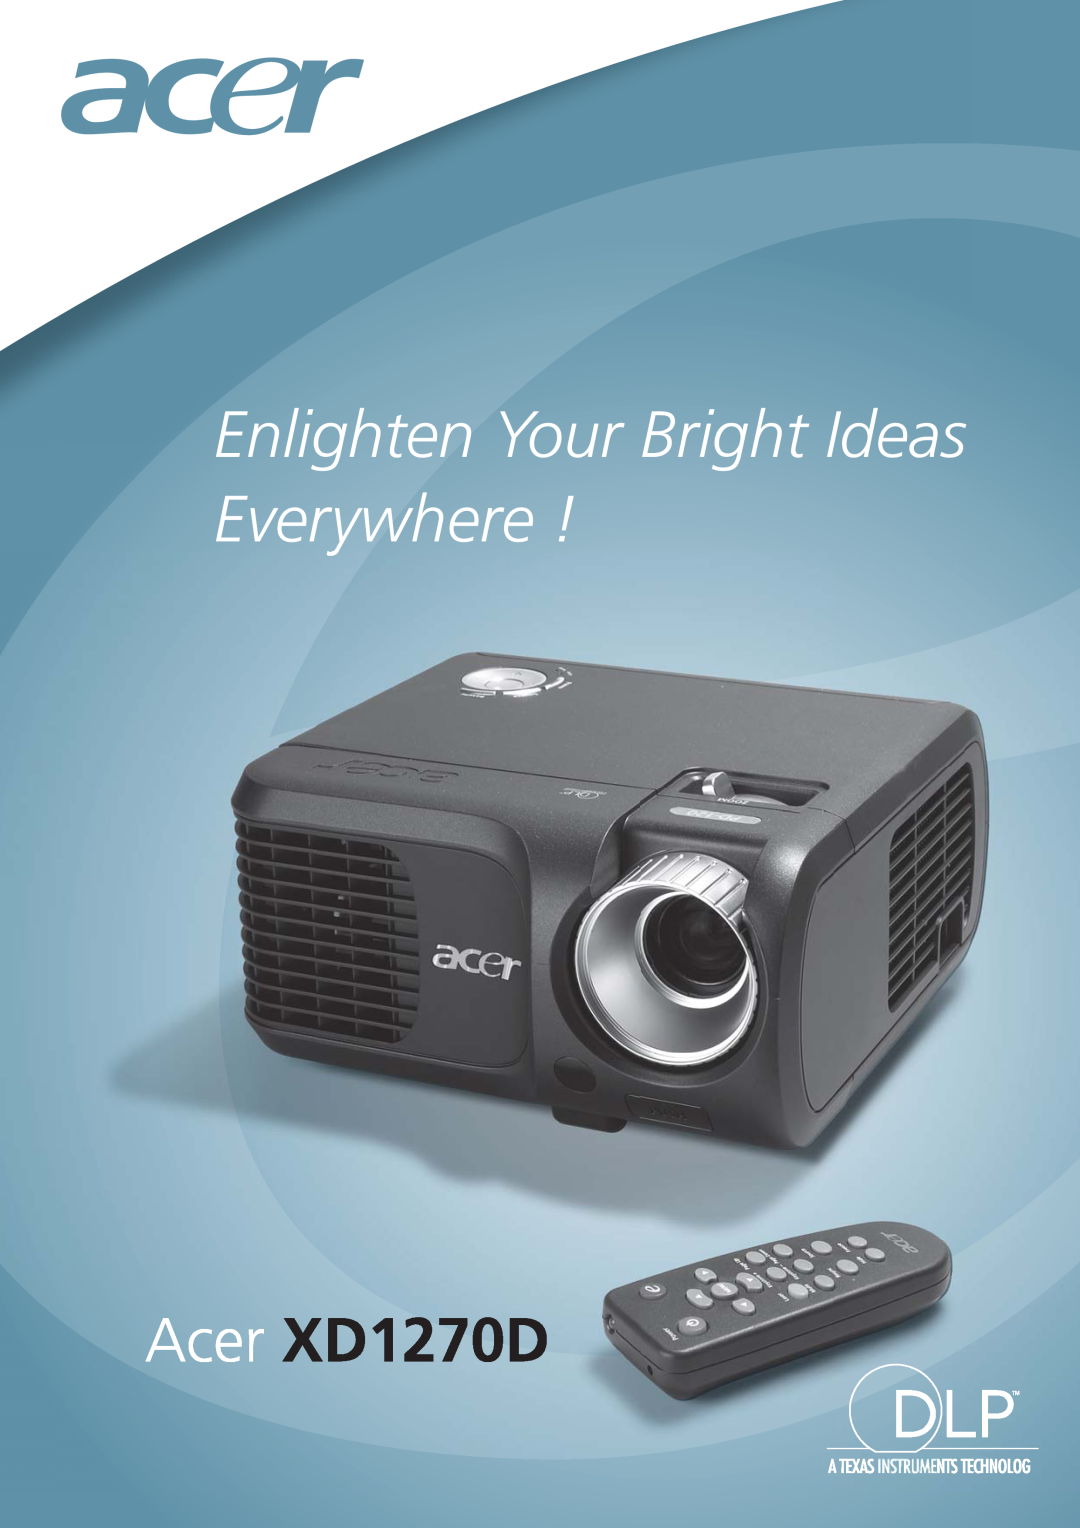 Acer manual Enlighten Your Bright Ideas, Everywhere, Acer XD1270D 